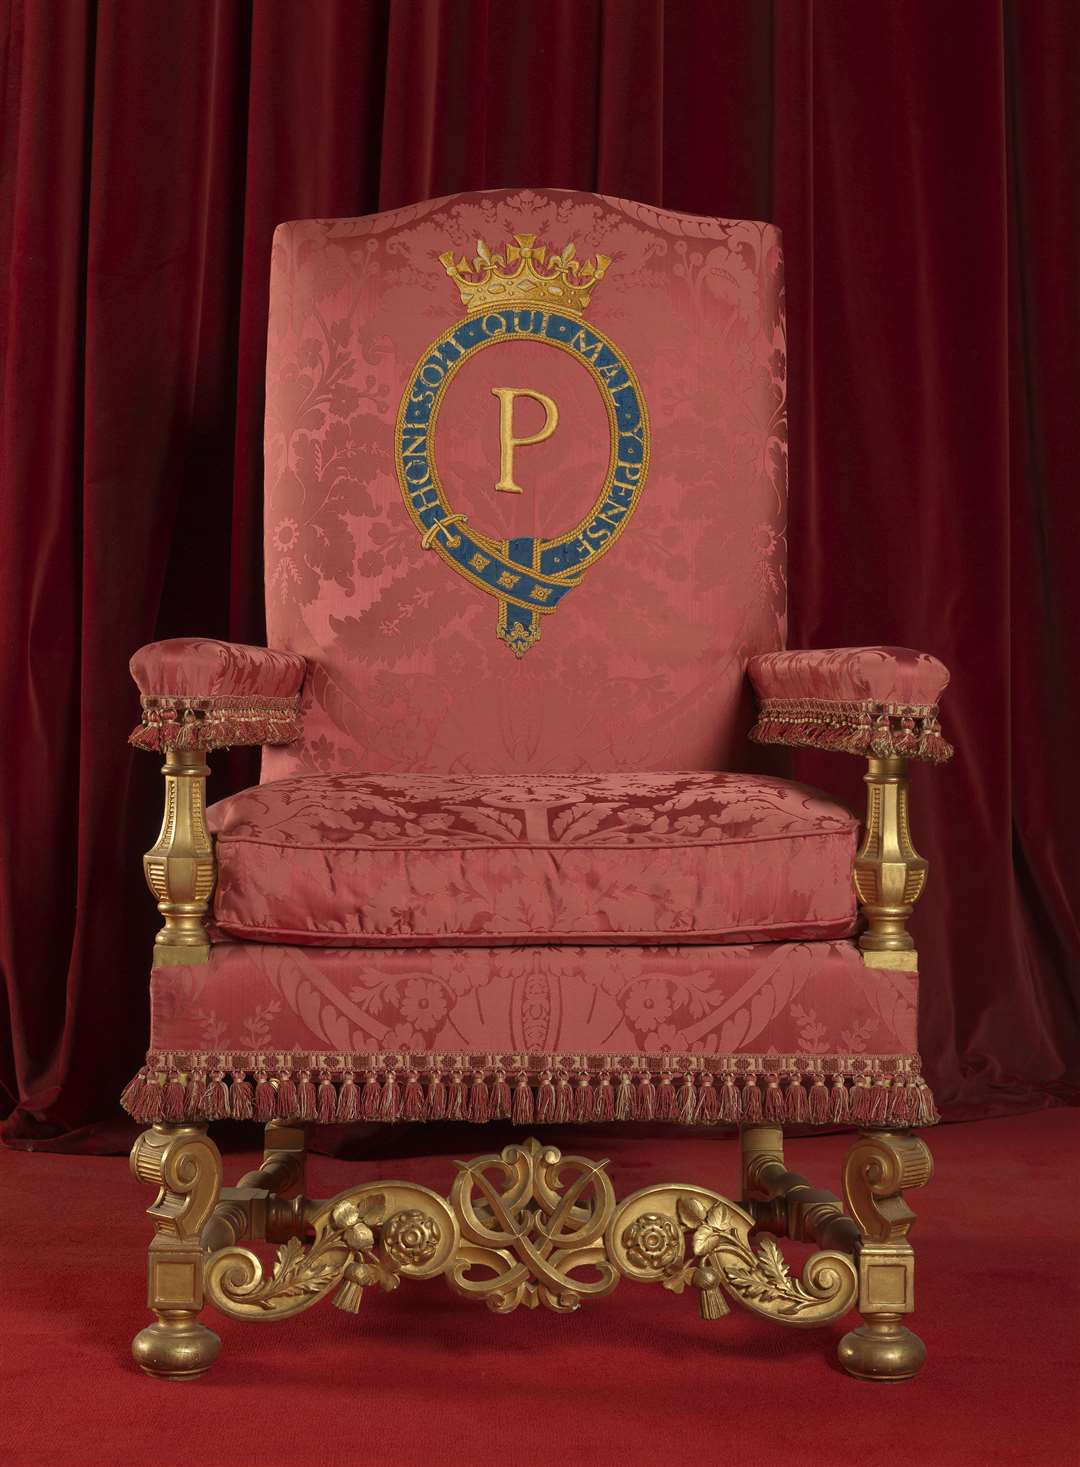 Prince Philip's chair has been taken from the Throne Room at Buckingham Palace. Picture courtesy of: Royal Collection Trust / © Her Majesty Queen Elizabeth II 2021